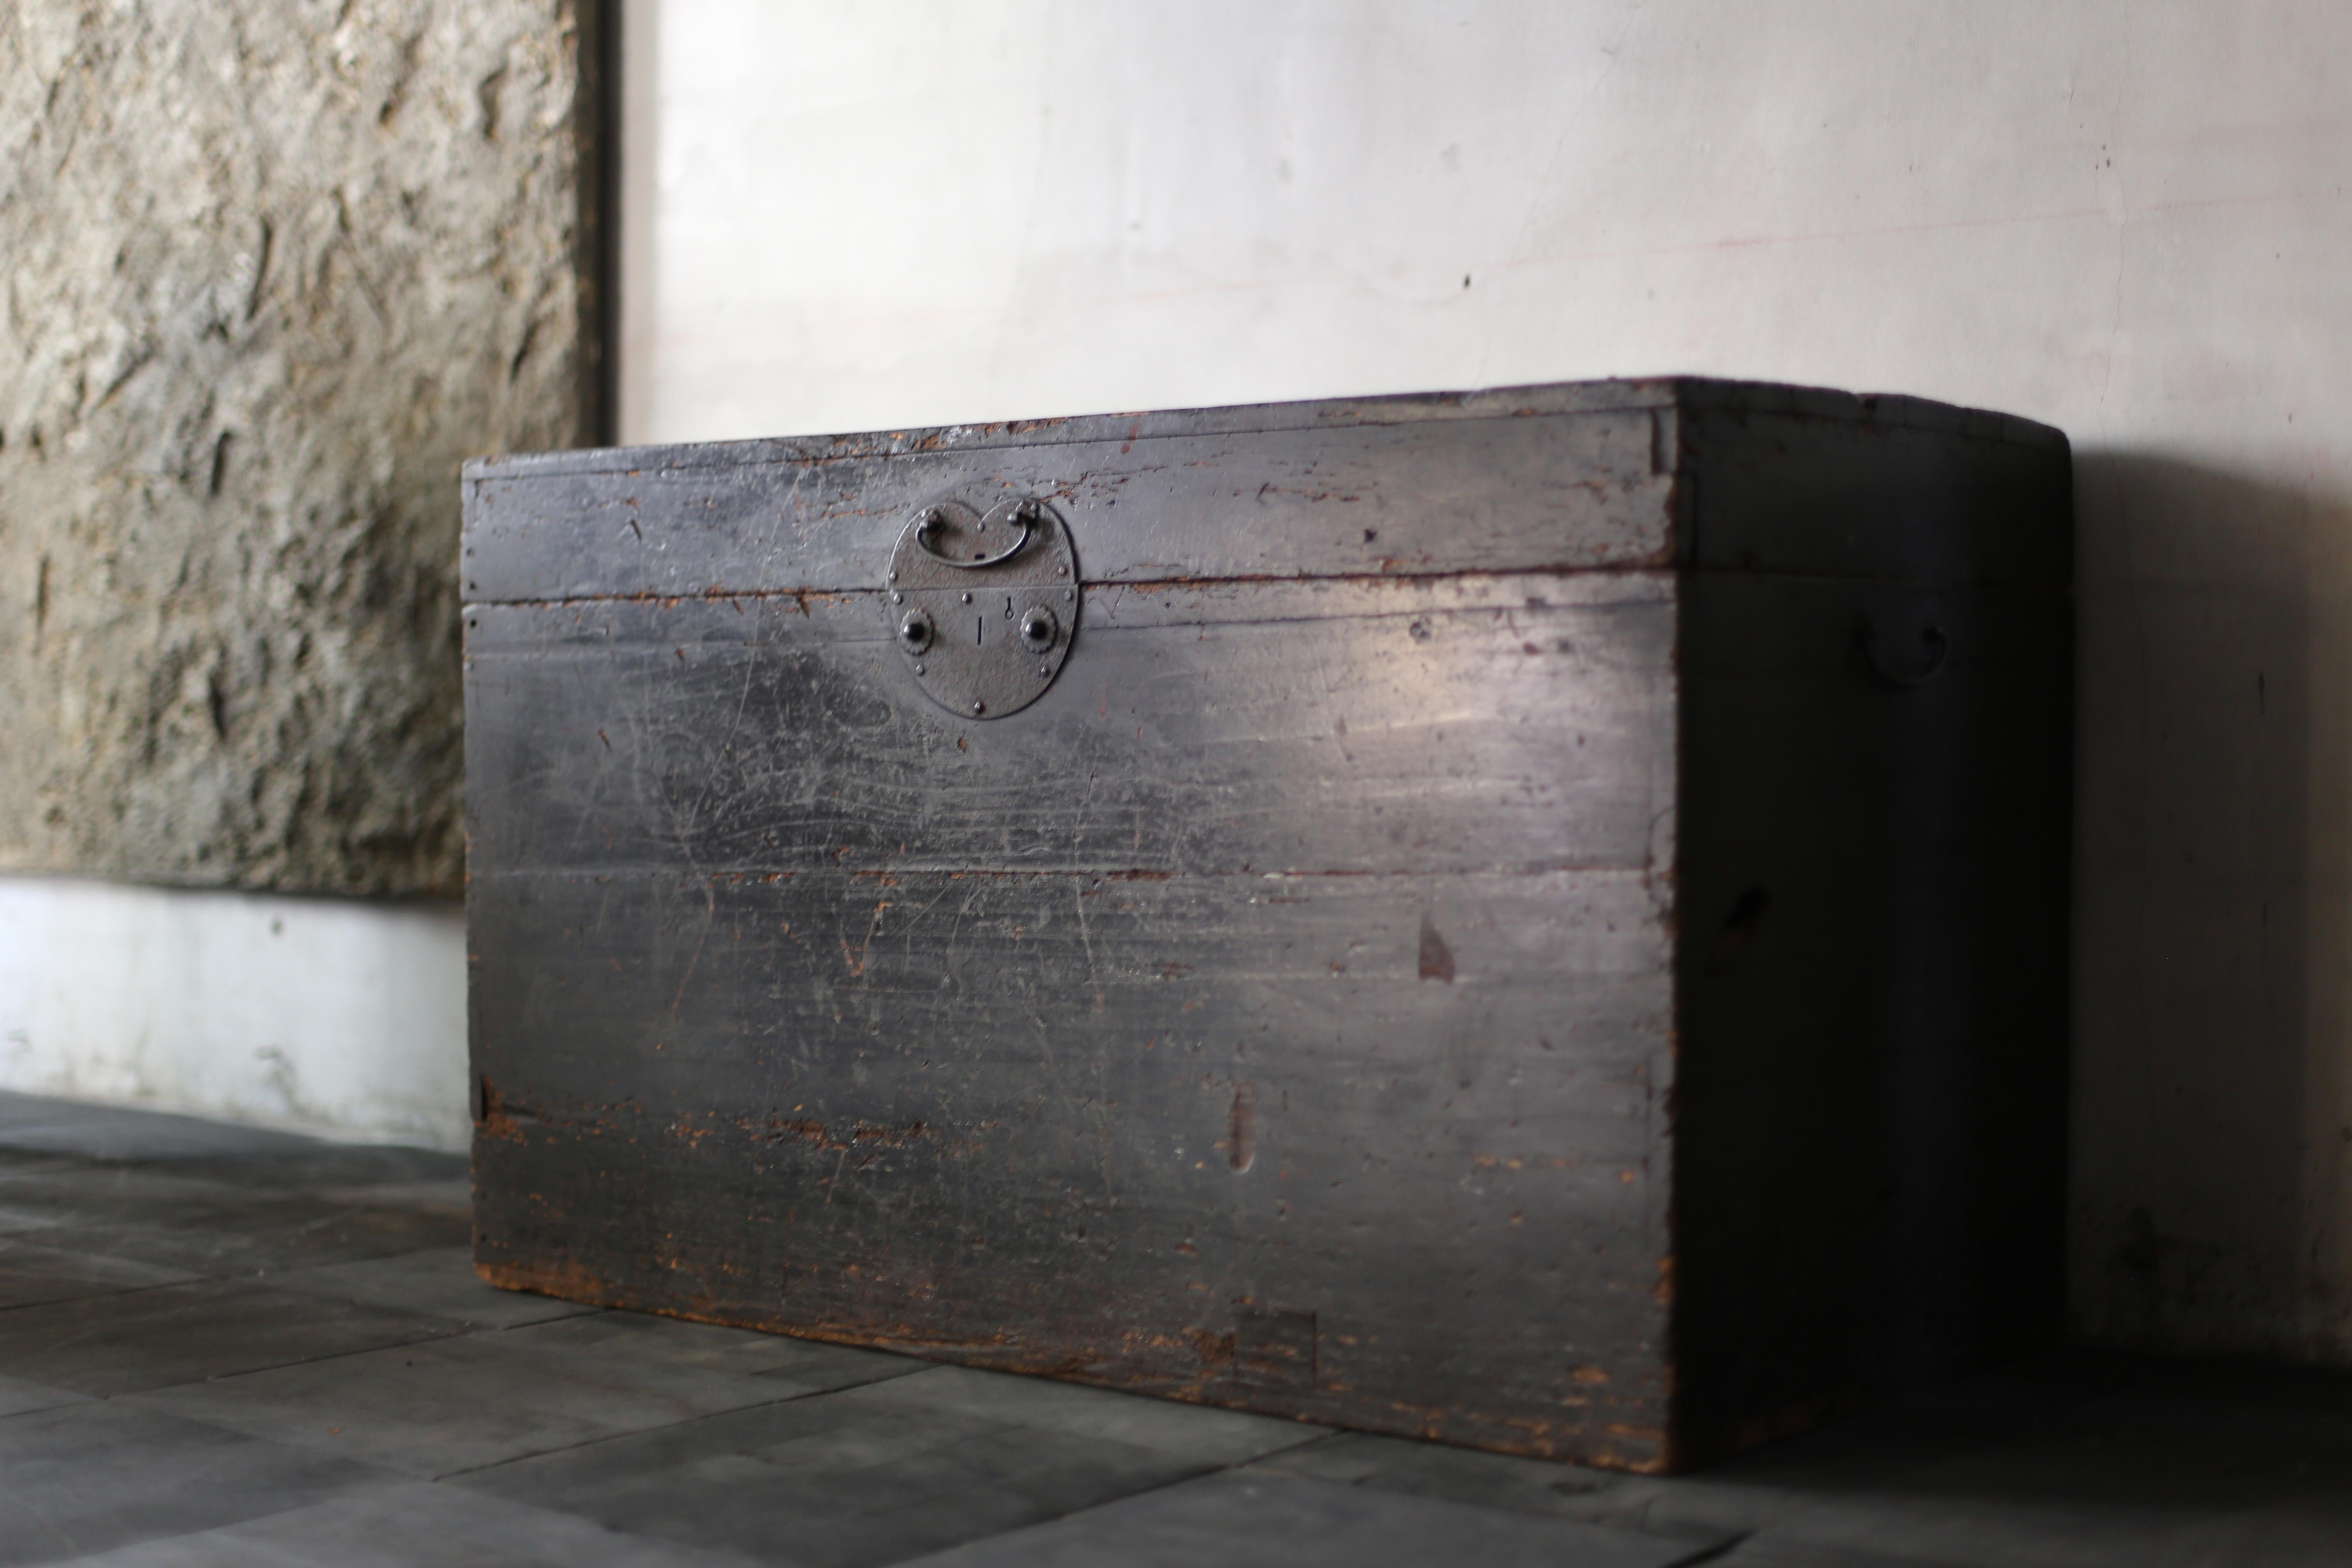 Very old Japanese storage box.
This furniture was made in the Meiji period (1860s-1900s).
Material is cedar wood.

No unnecessary decoration, simple and beautiful.
Ultimate simplicity.
It is cool in smoked black color.

This furniture is versatile